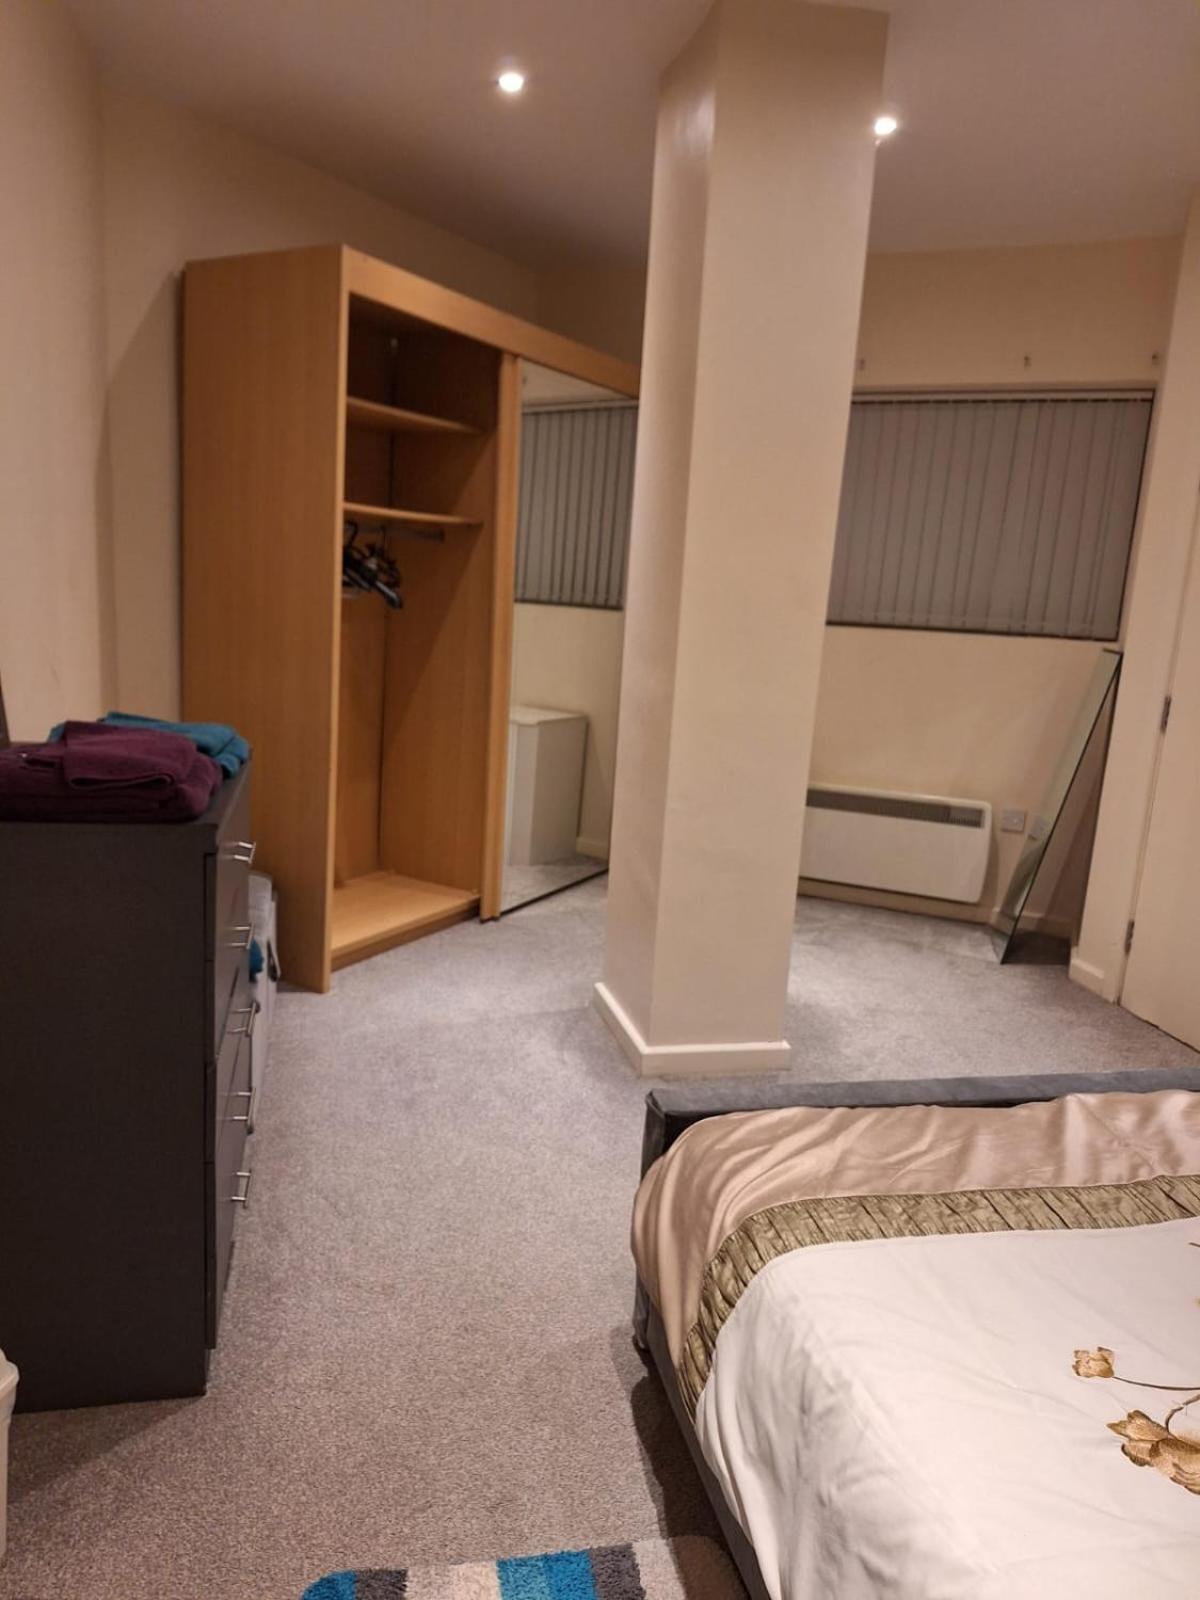 Fabulous Home From Home - Central Long Eaton - Lovely Short-Stay Apartment - High Speed Fibre Optic Broadband Internet - High Speed Streaming Possible Suitable For Working From Home And Students Very Spacious Free Parking Nearby Exterior photo